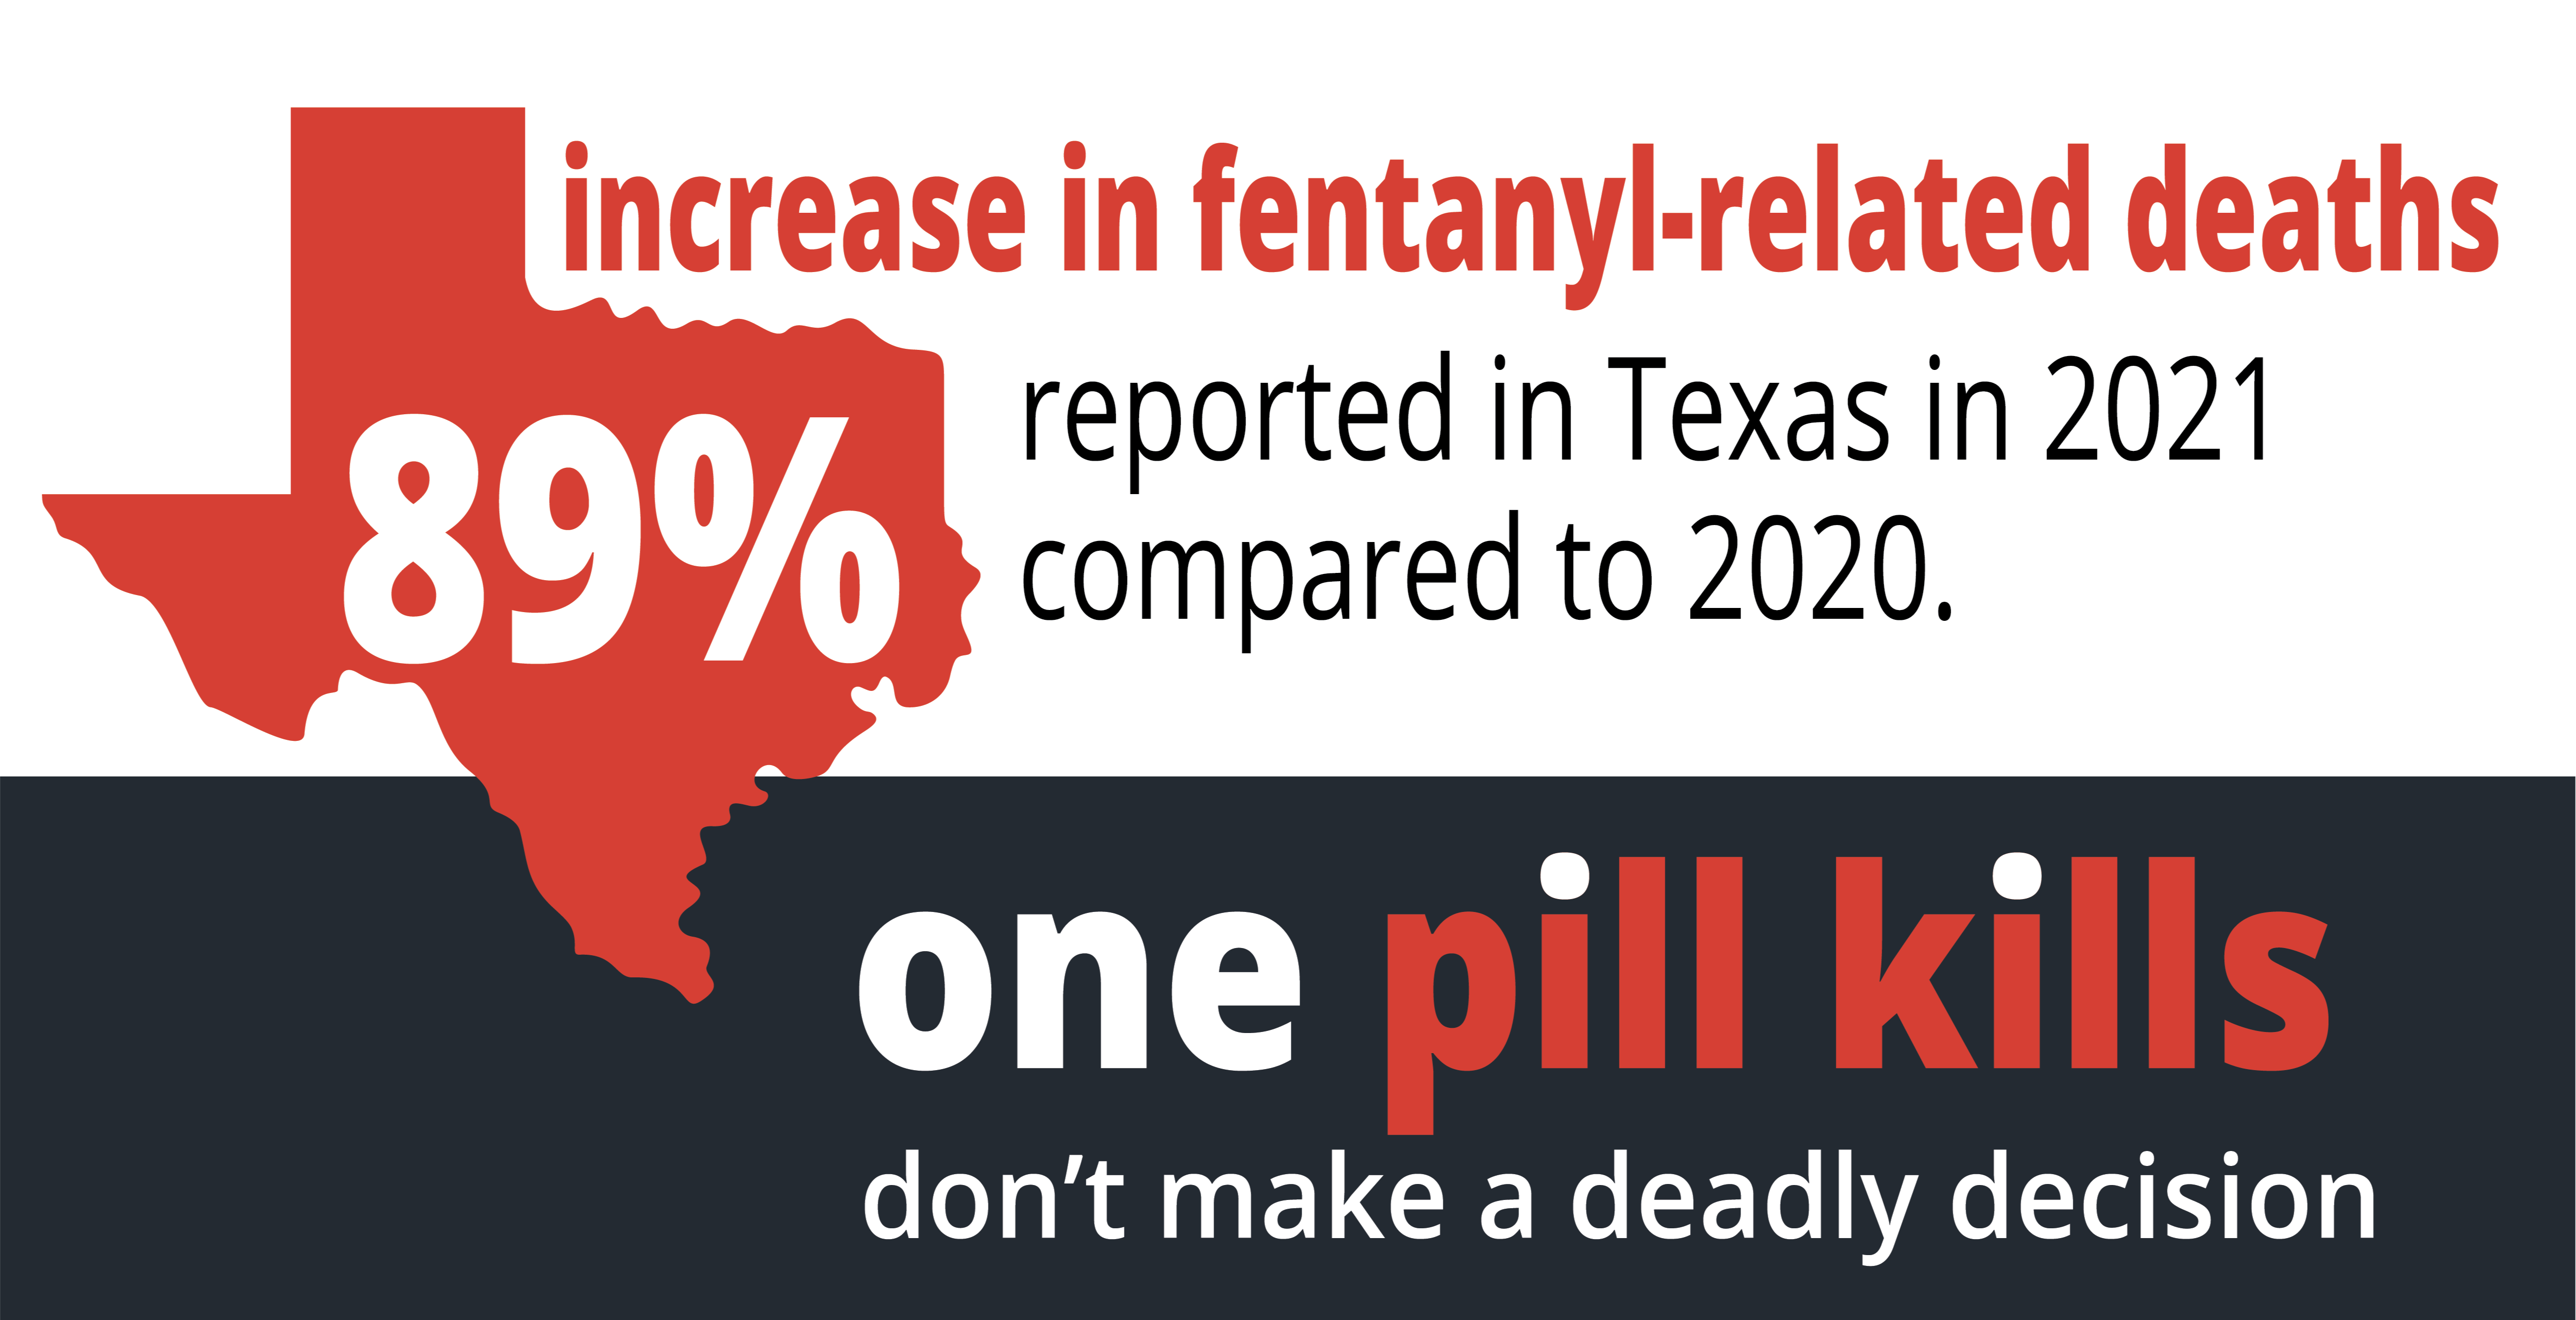 89% increase in fentanyl related deaths reported in Texas in 2021 compared to 2020. One pill kills. don't make a deadly decision